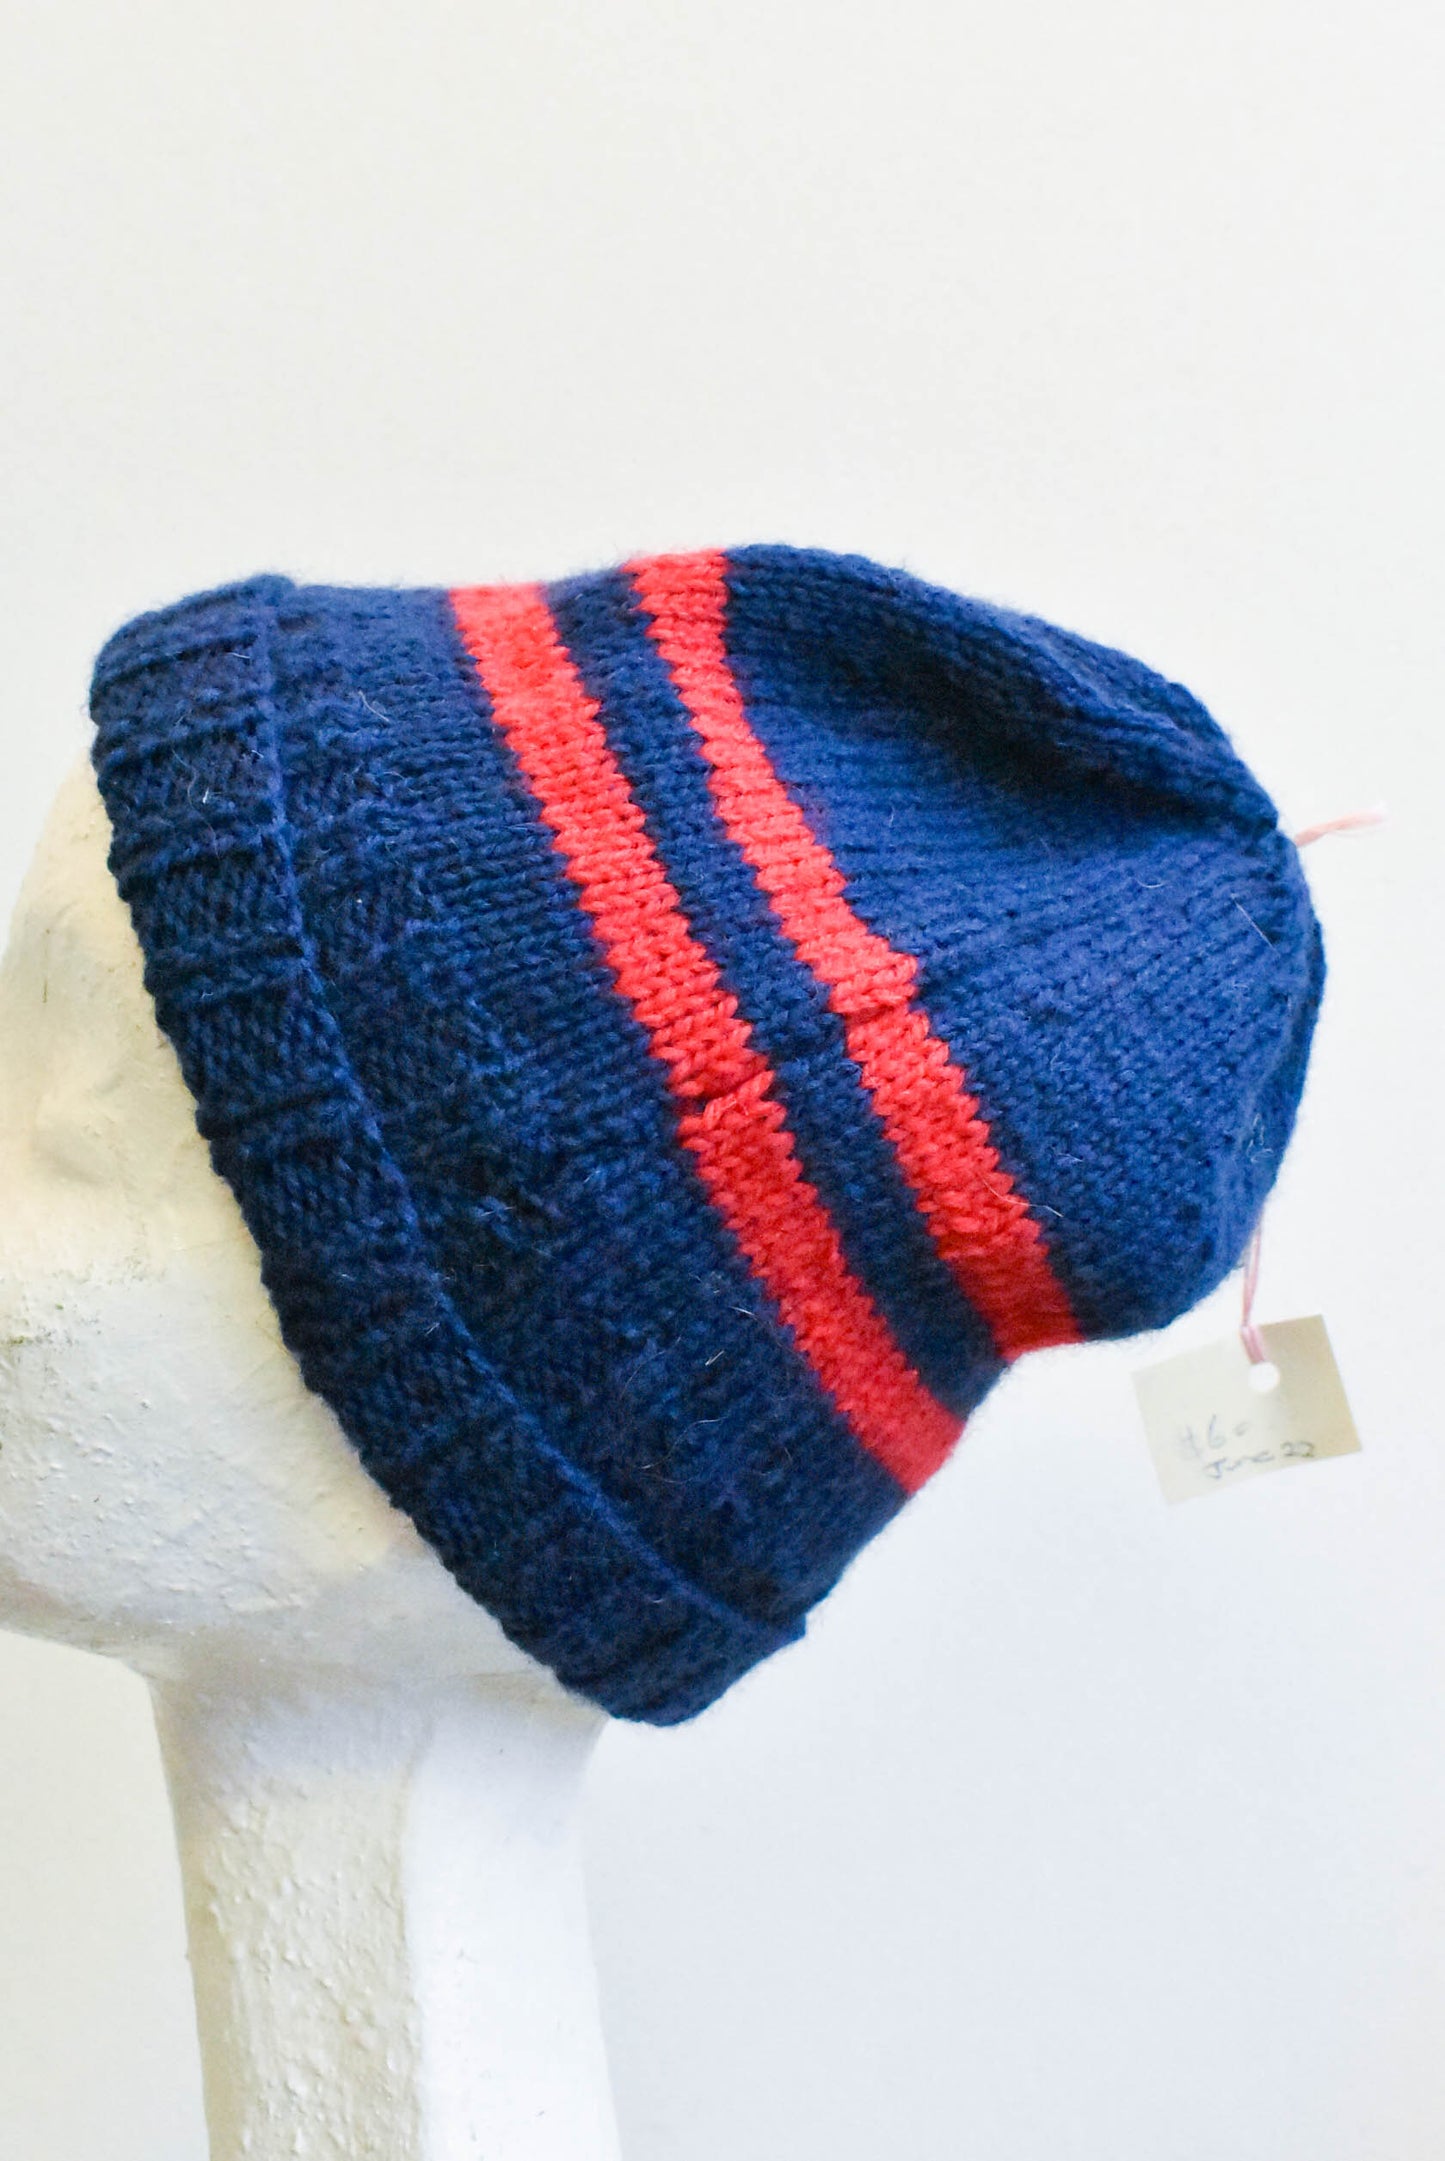 Blue and red beanie, size S